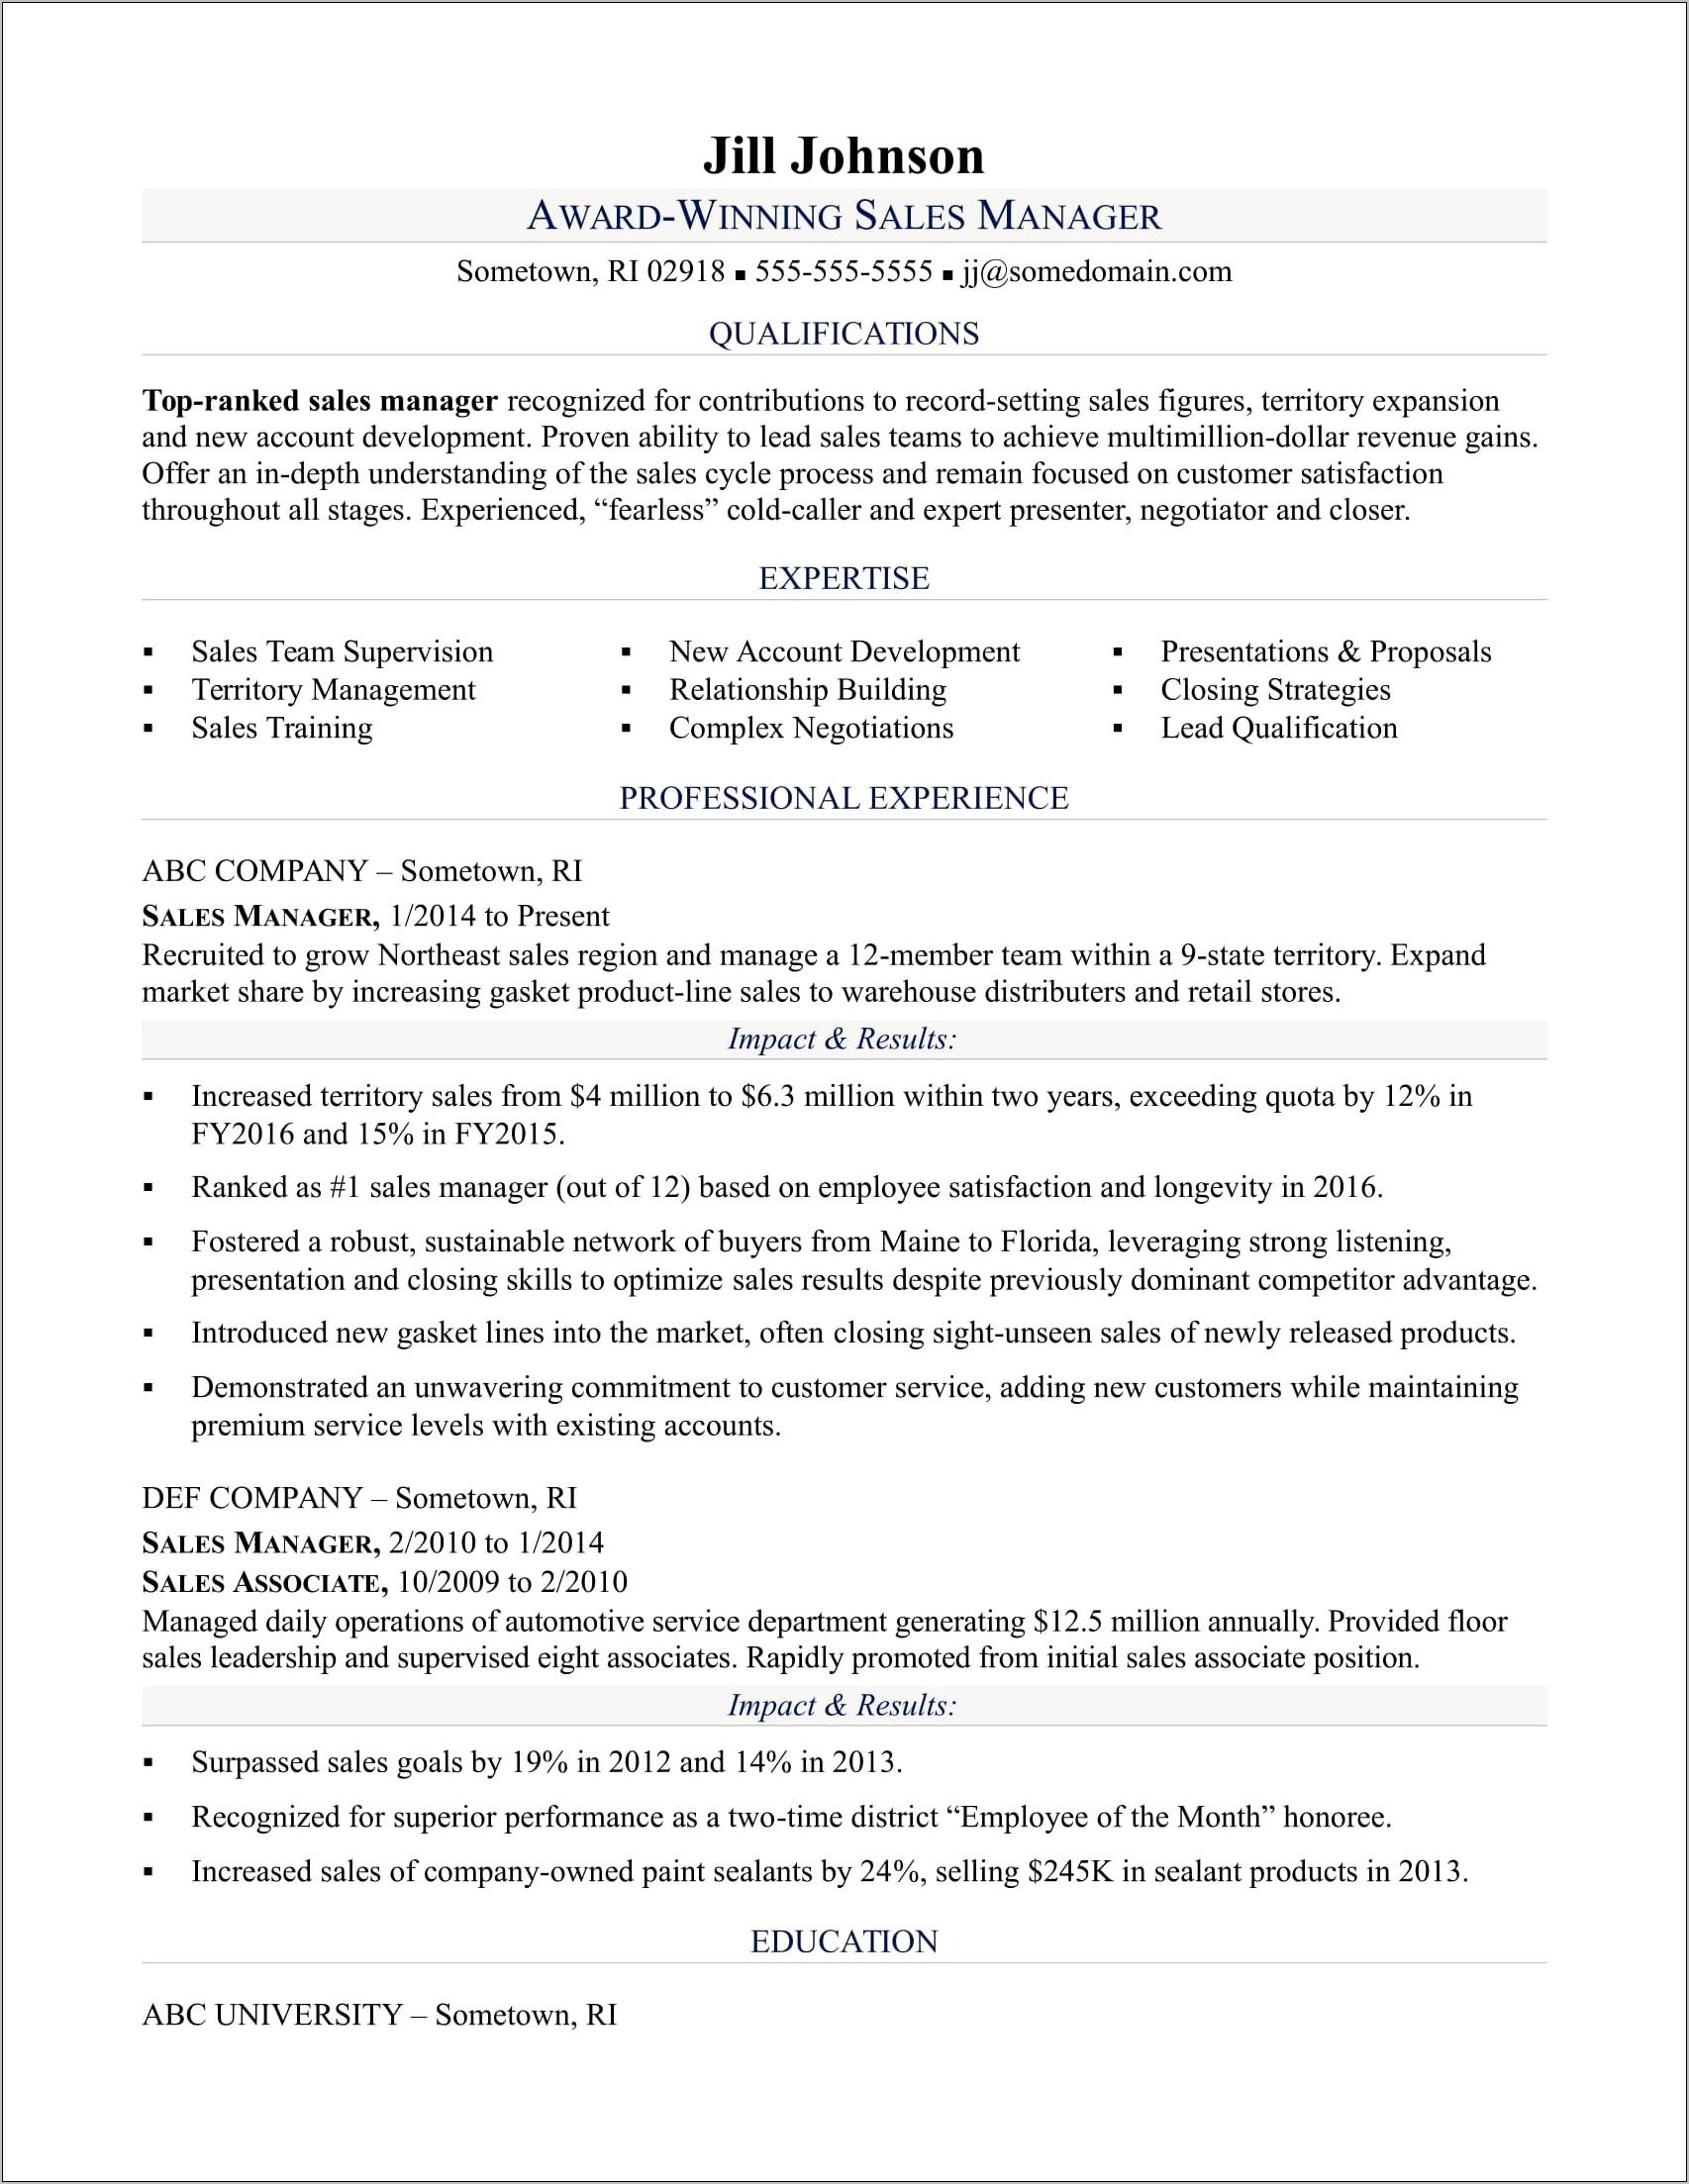 Sales Manager Qualifications On Resume